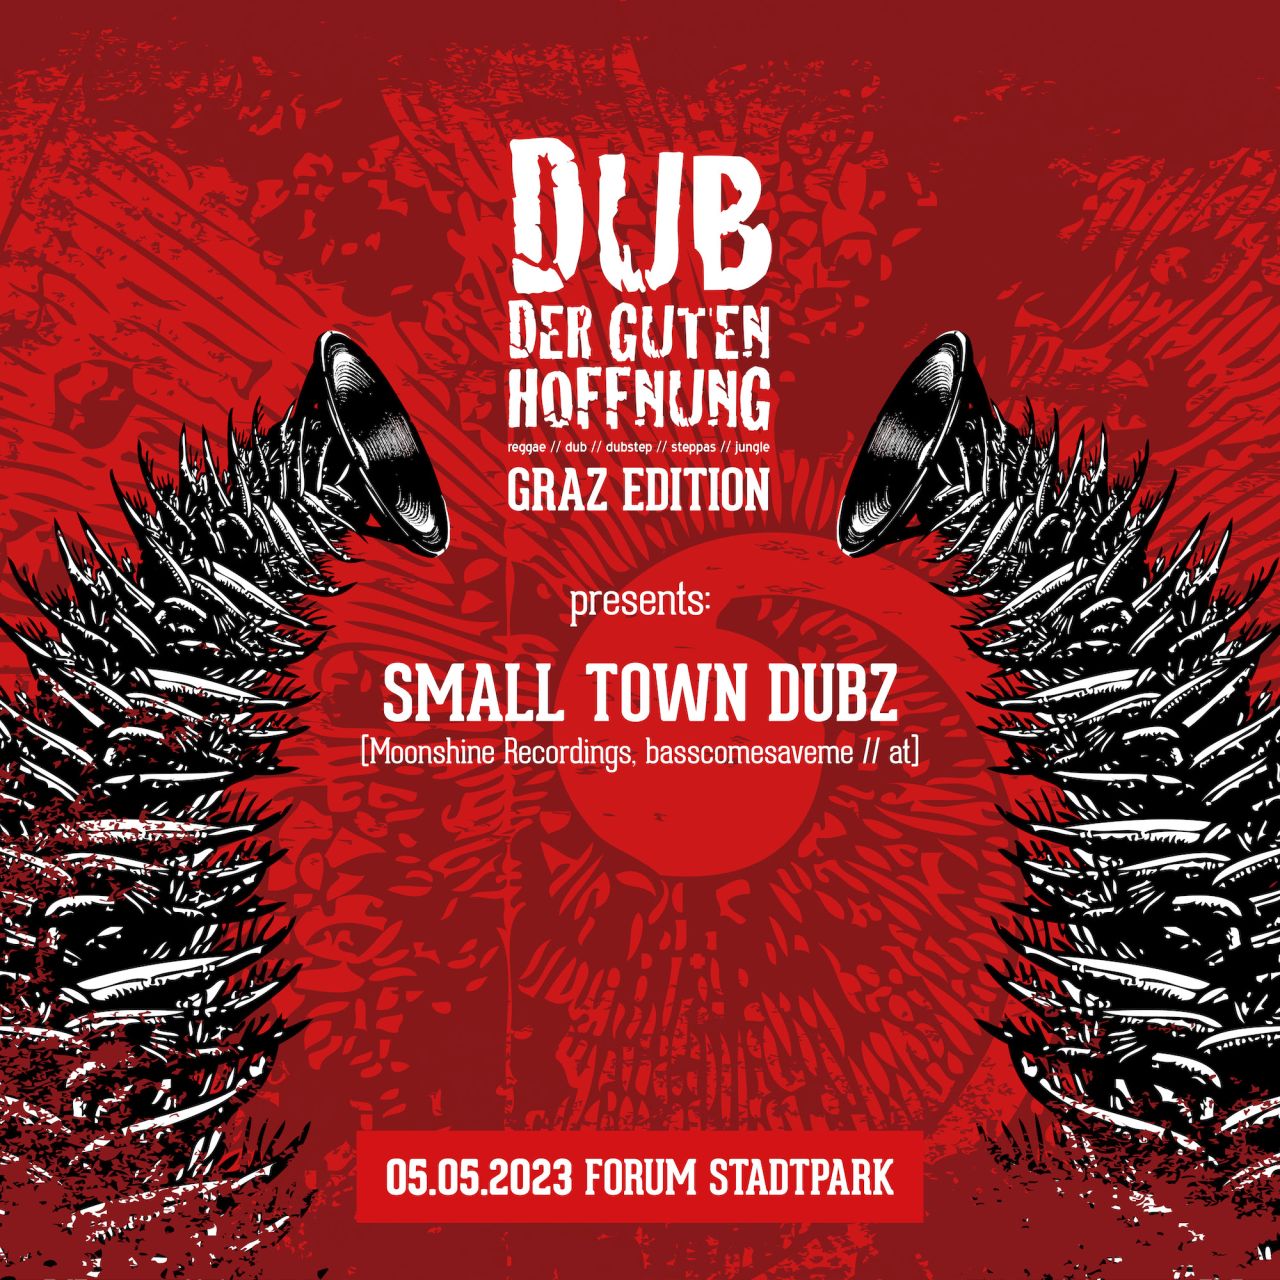 presenting Small Town Dubz